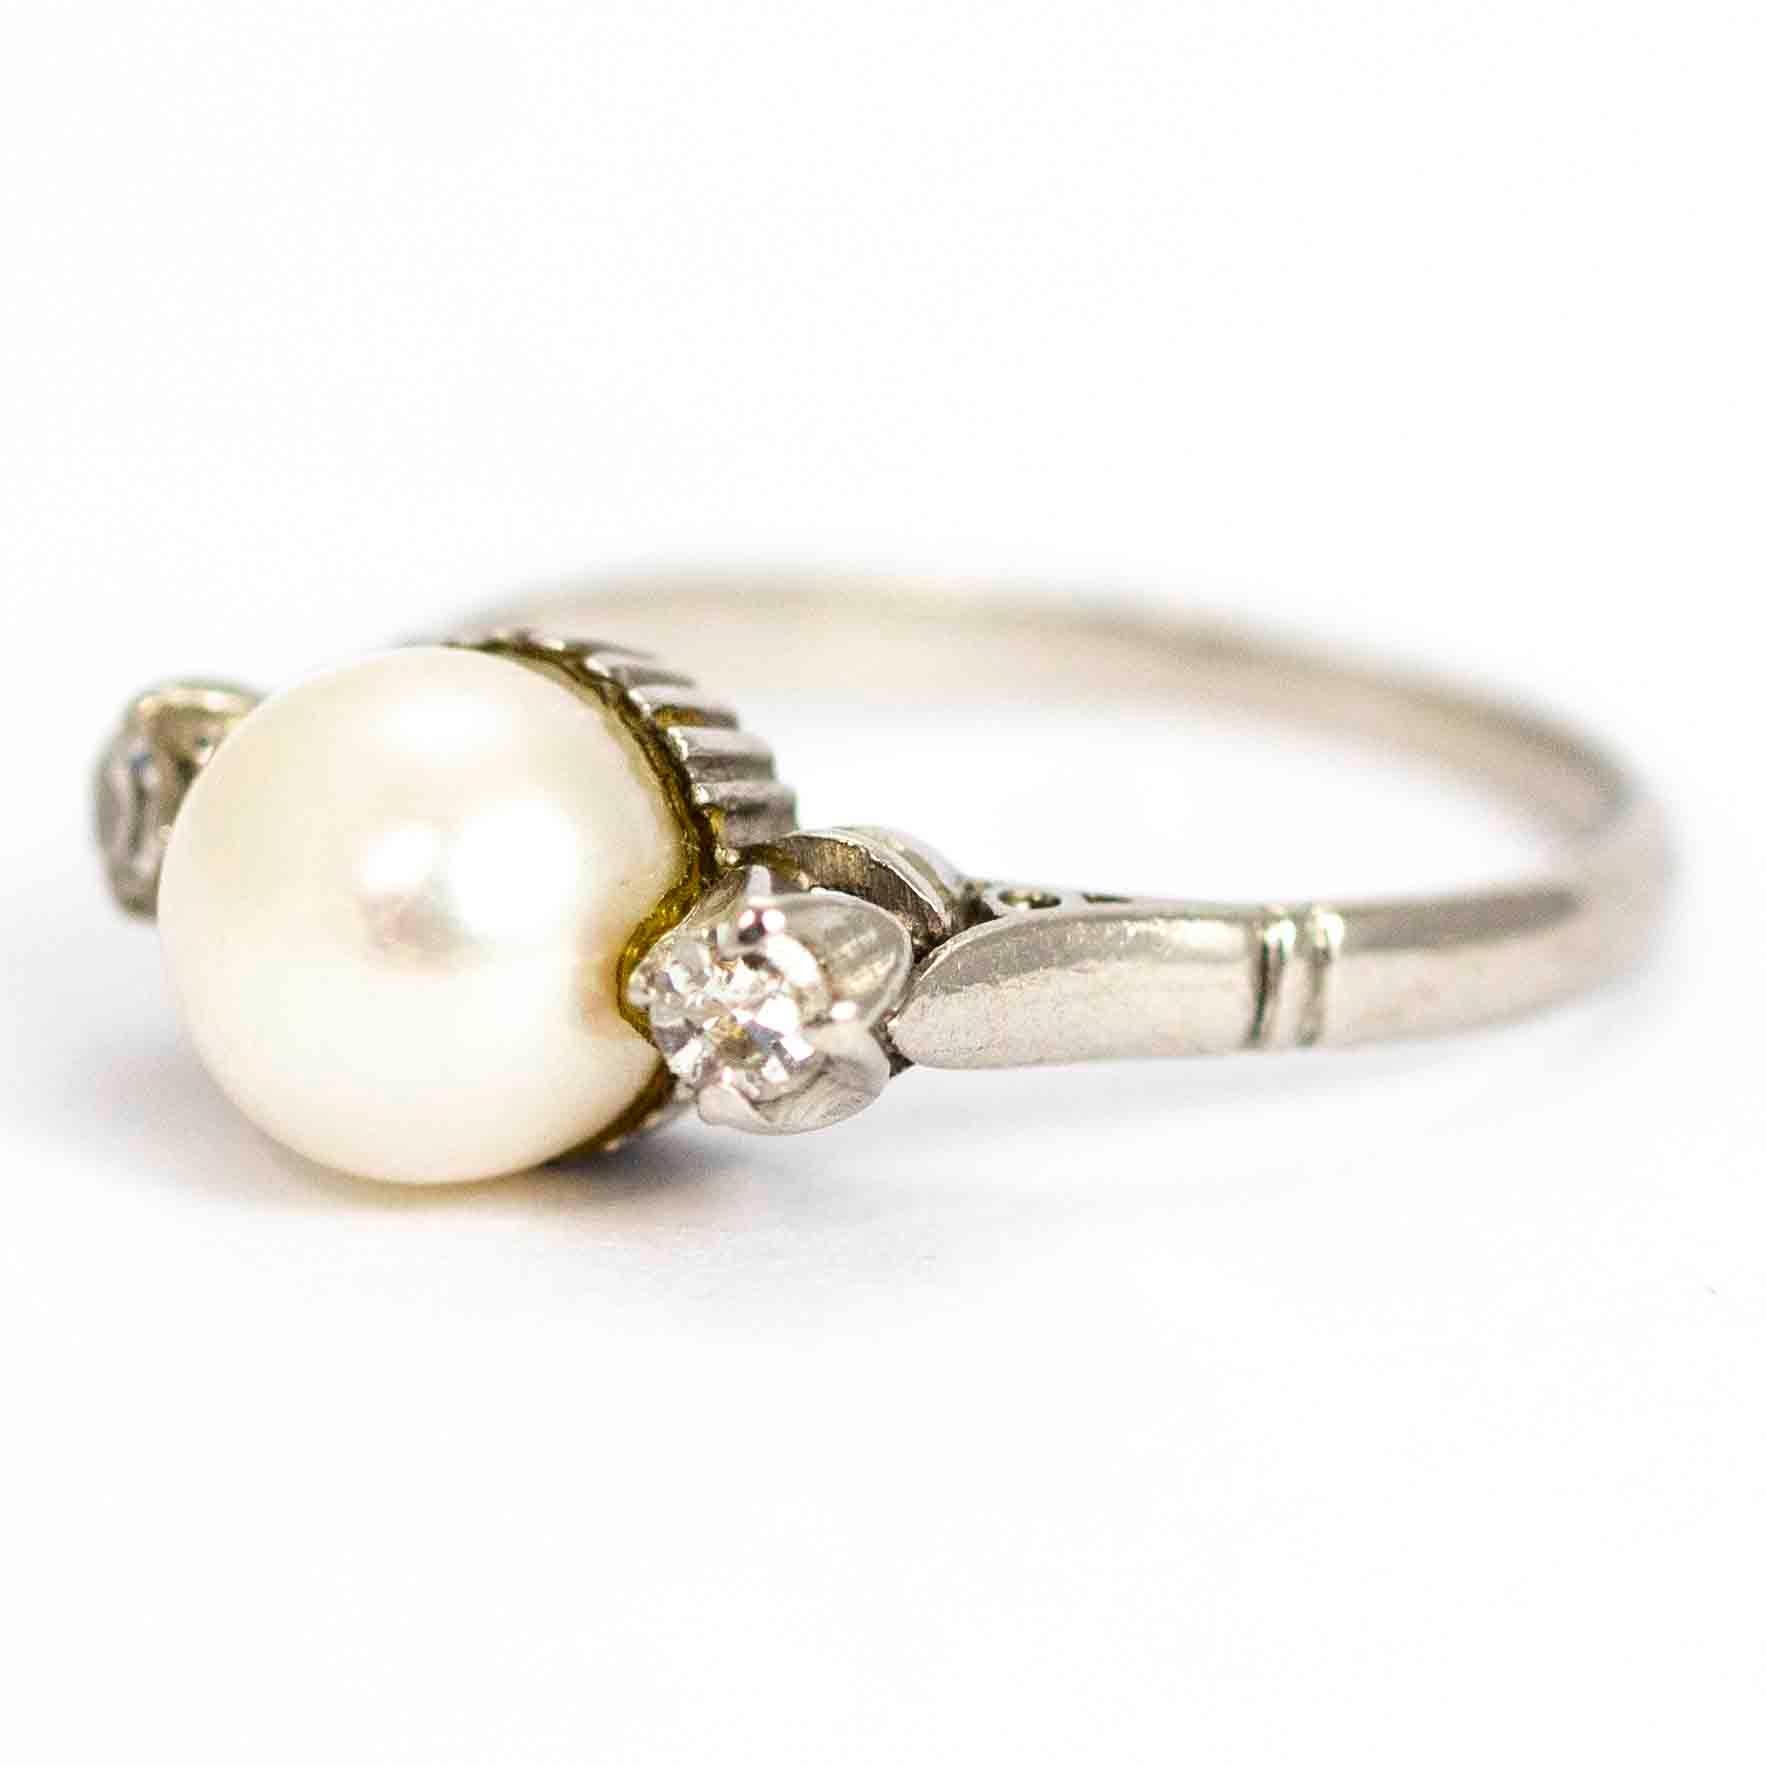 A stunning vintage Art Deco three-stone ring set with pearl and diamonds. The beautiful large central pearl measures 7.35mm in diameter, and is flanked by two wonderful old mine cut diamonds each measuring 10 points. Total diamond weight is 20